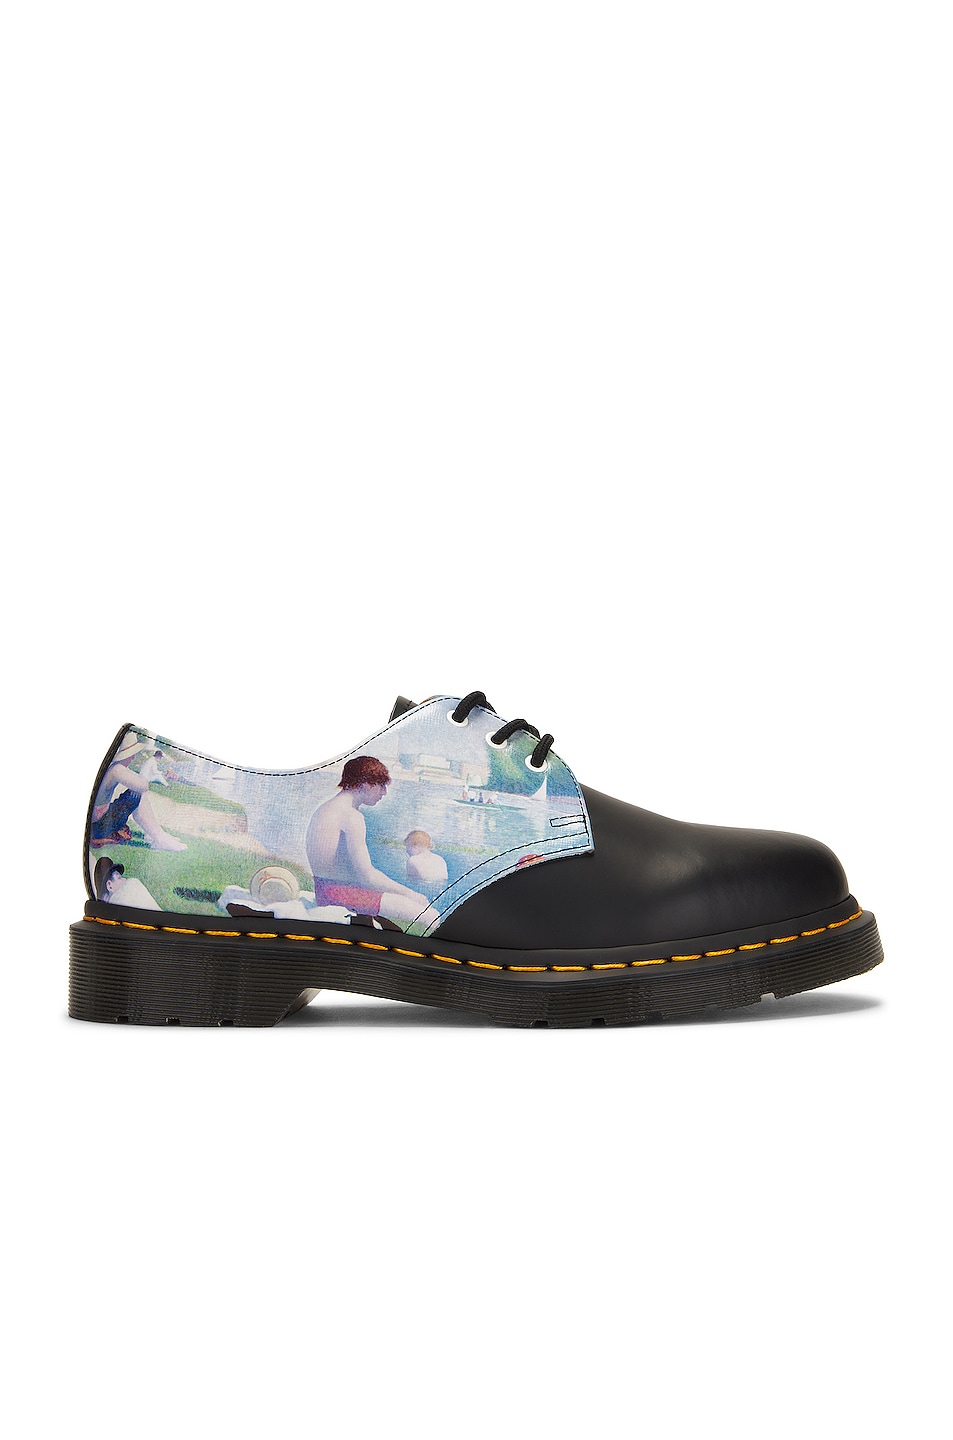 Image 1 of Dr. Martens x The National Gallery 1461 in Bathers